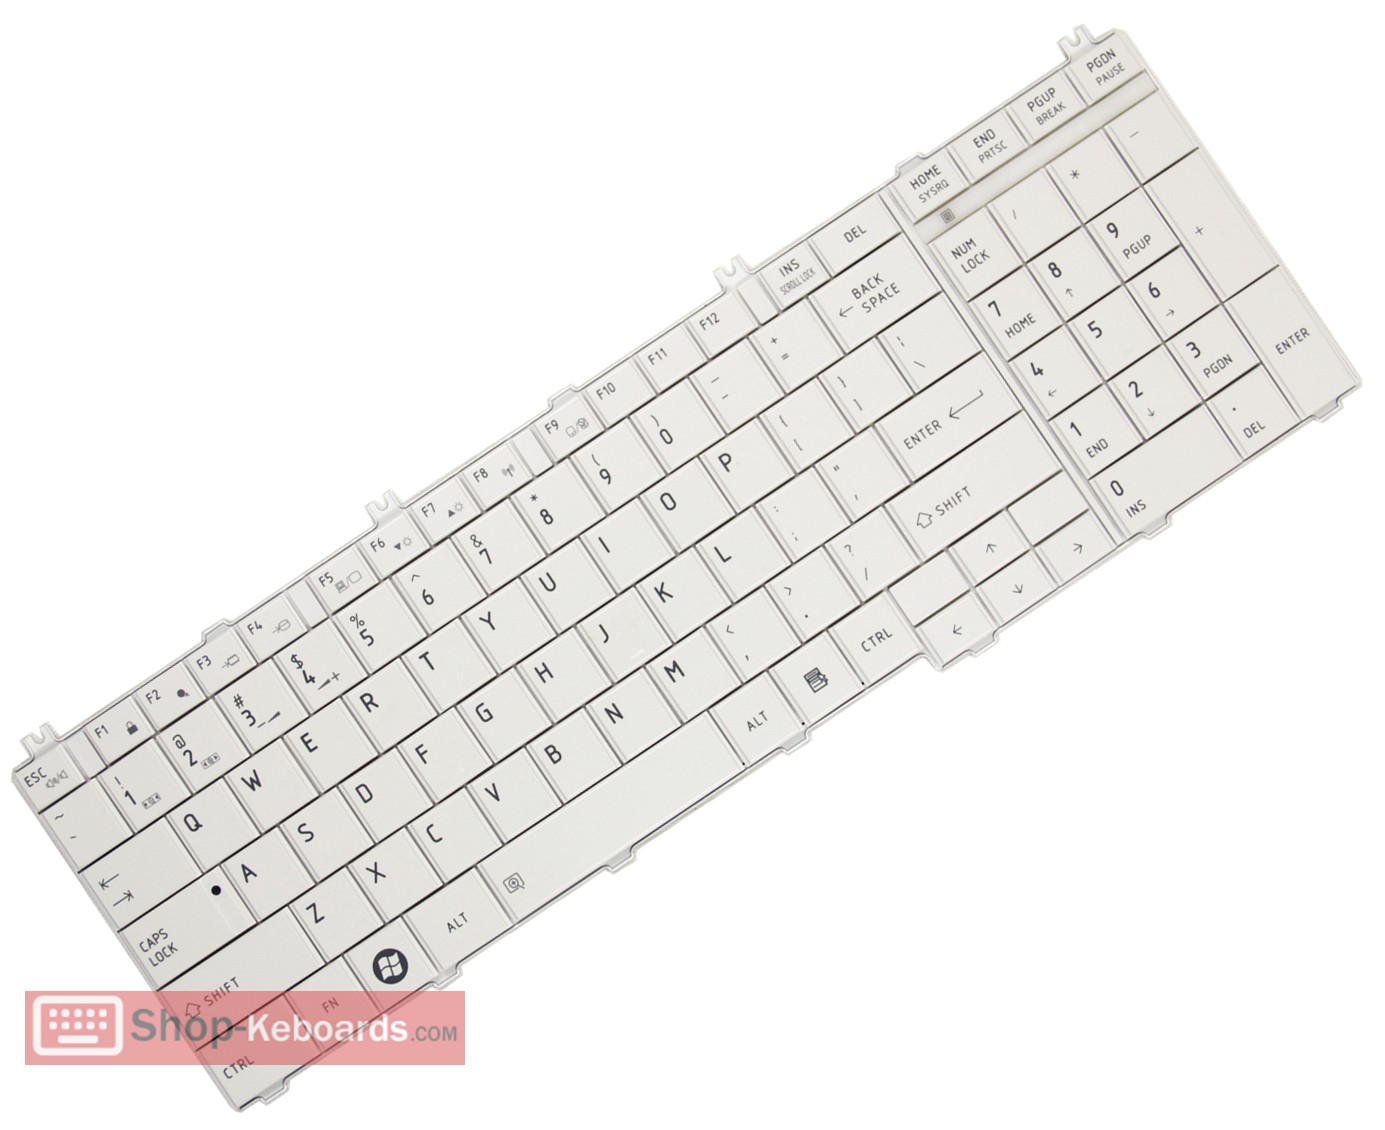 Toshiba Satellite C655D-S5228  Keyboard replacement